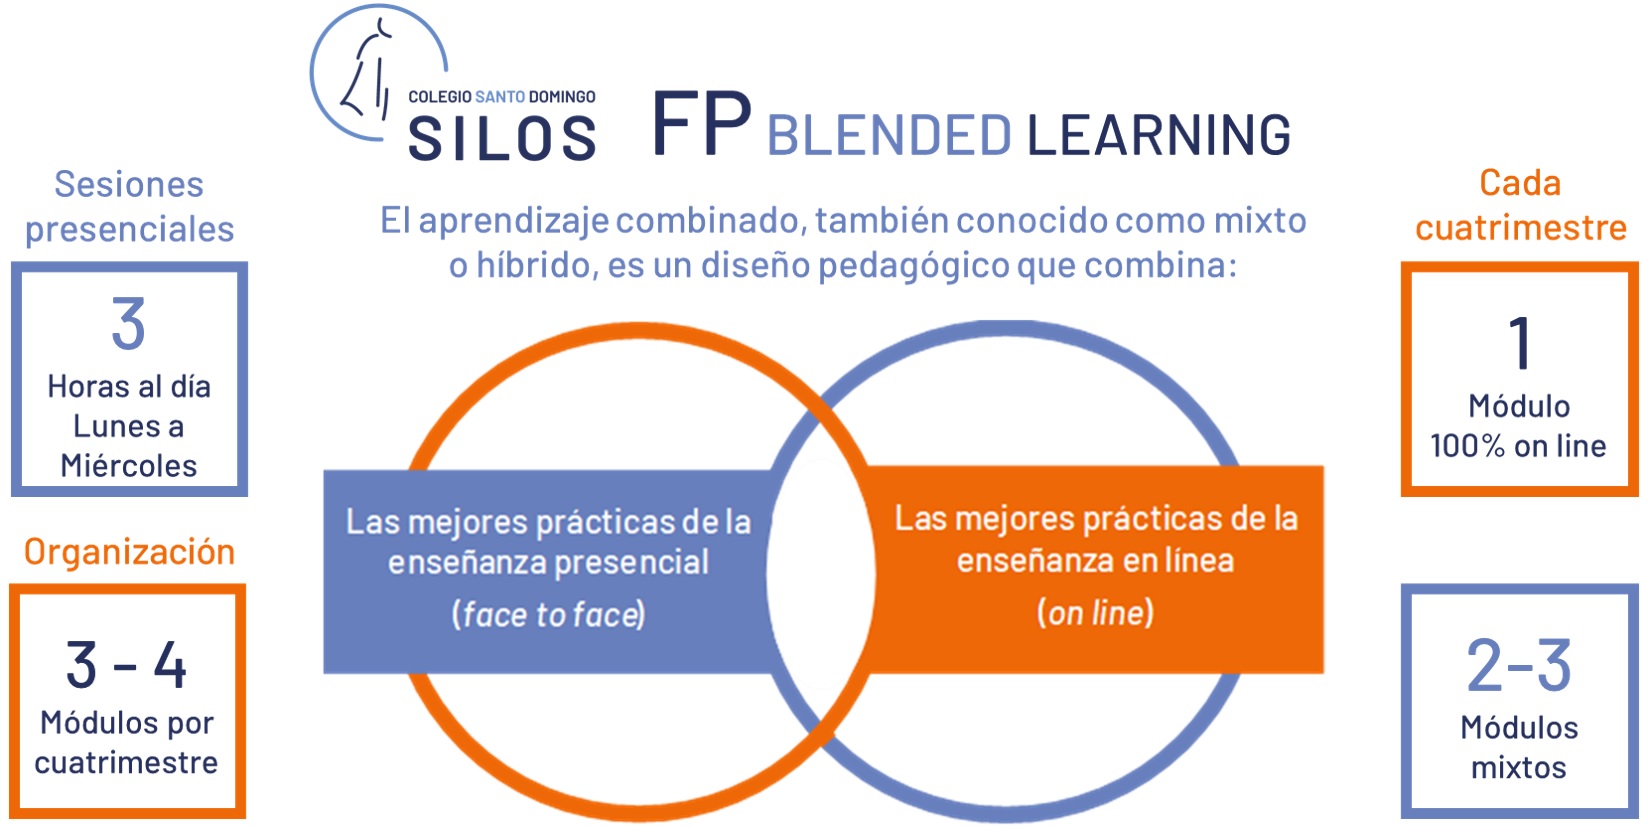 LO NUEVO: FP BLENDED LEARNING